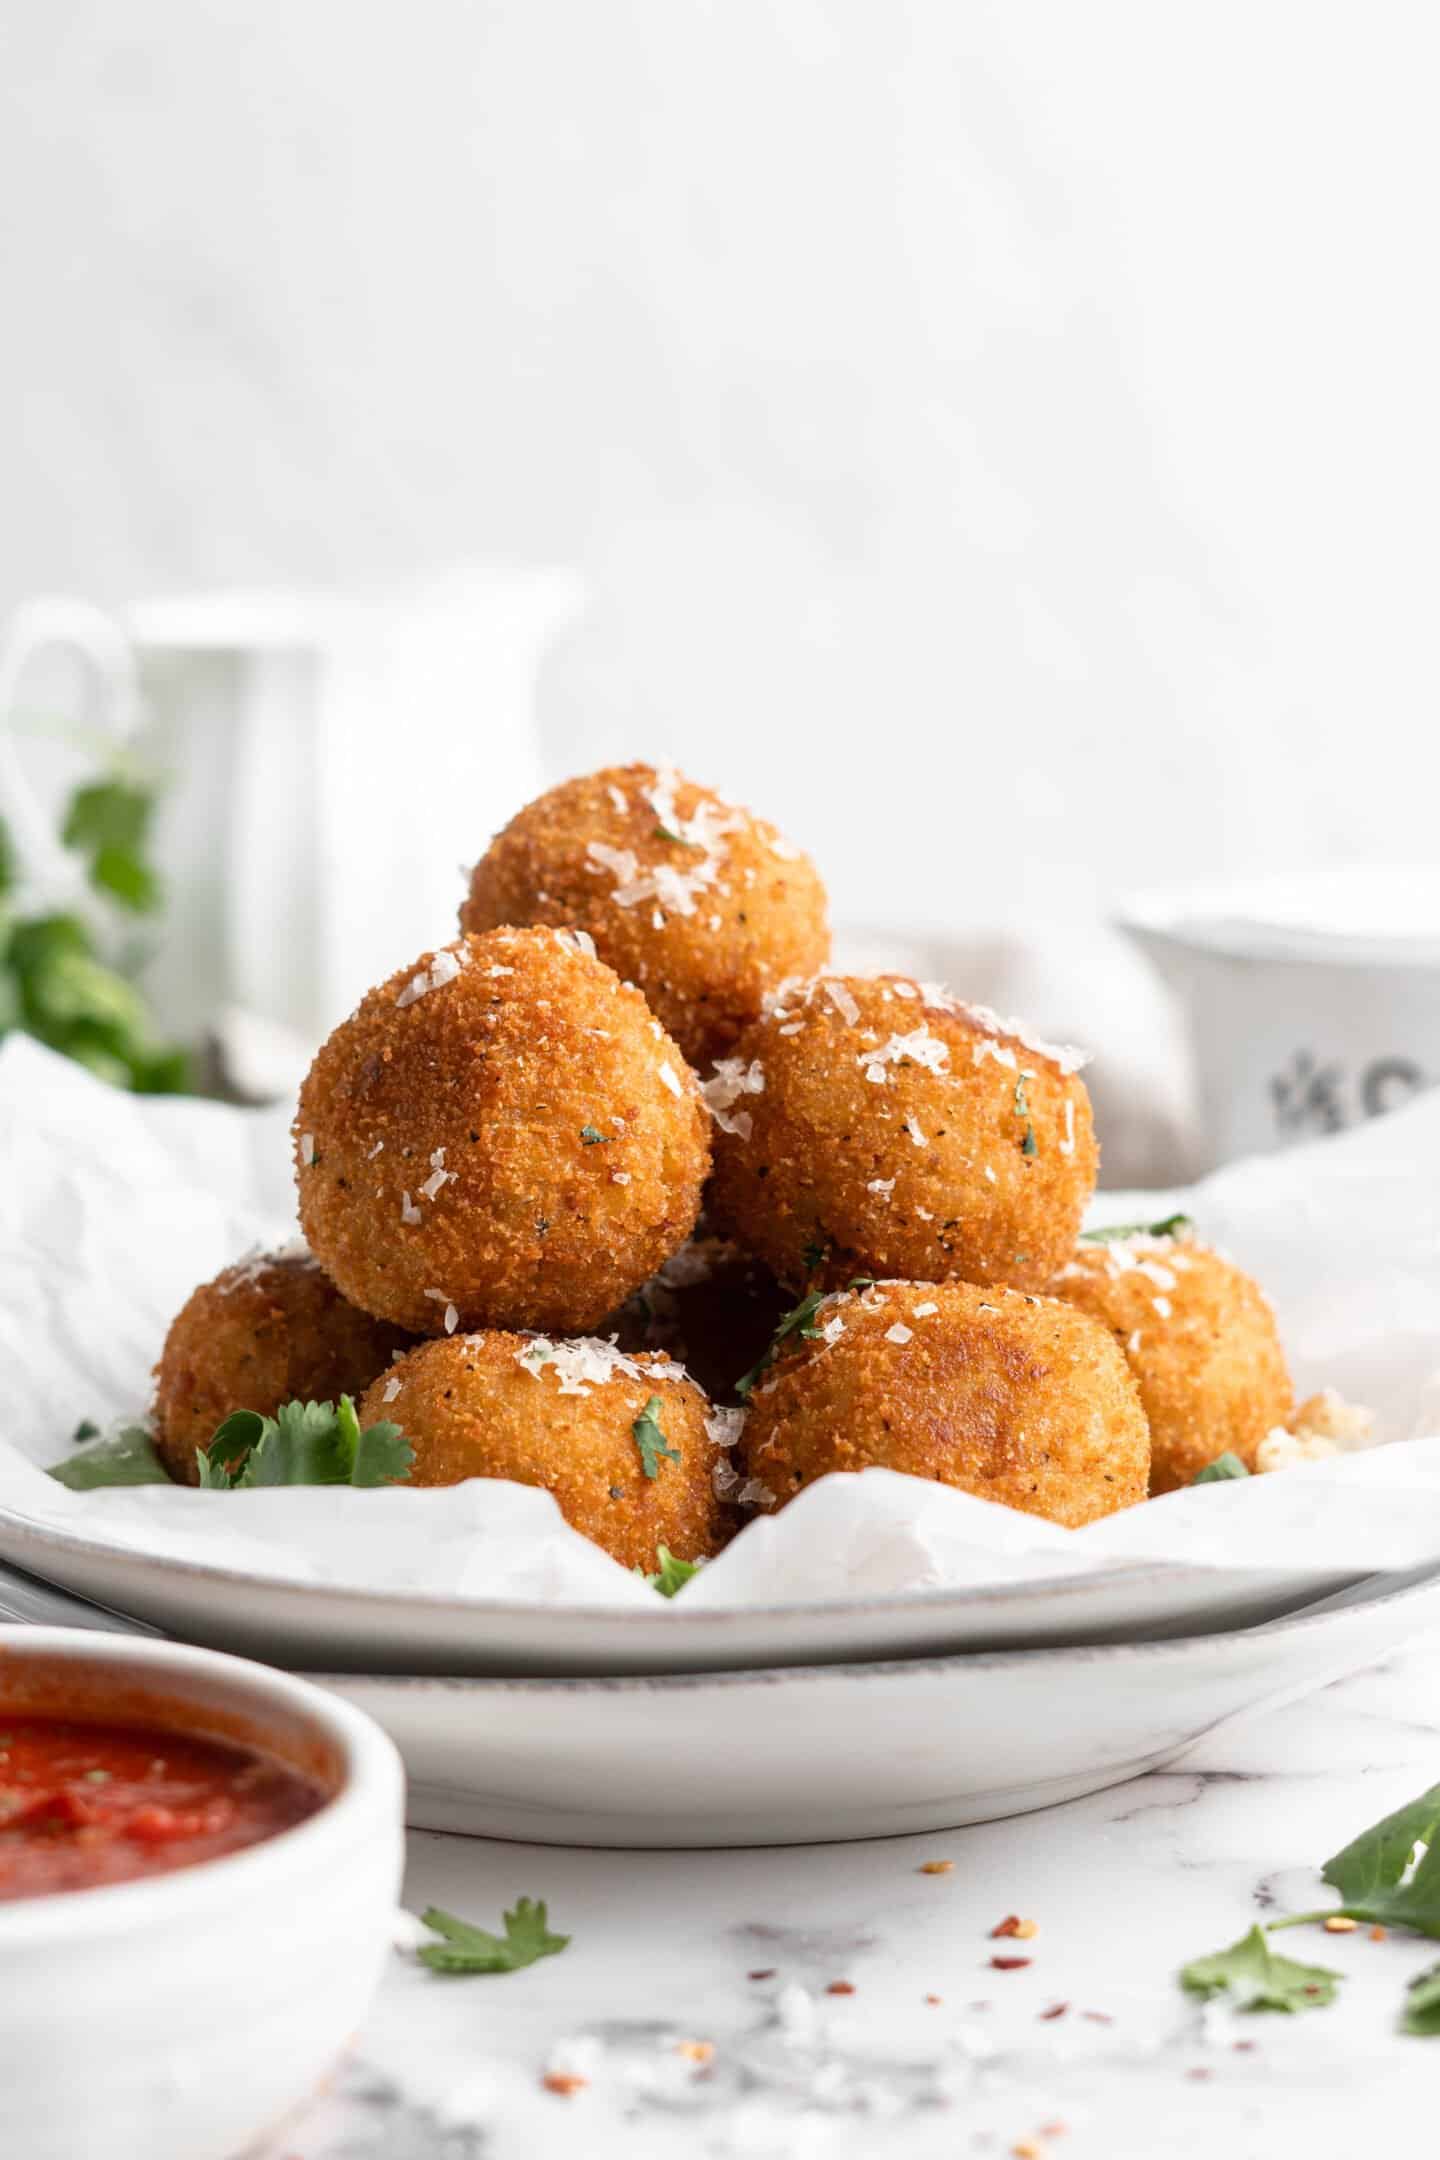 Pile of arancini on parchment-lined plate